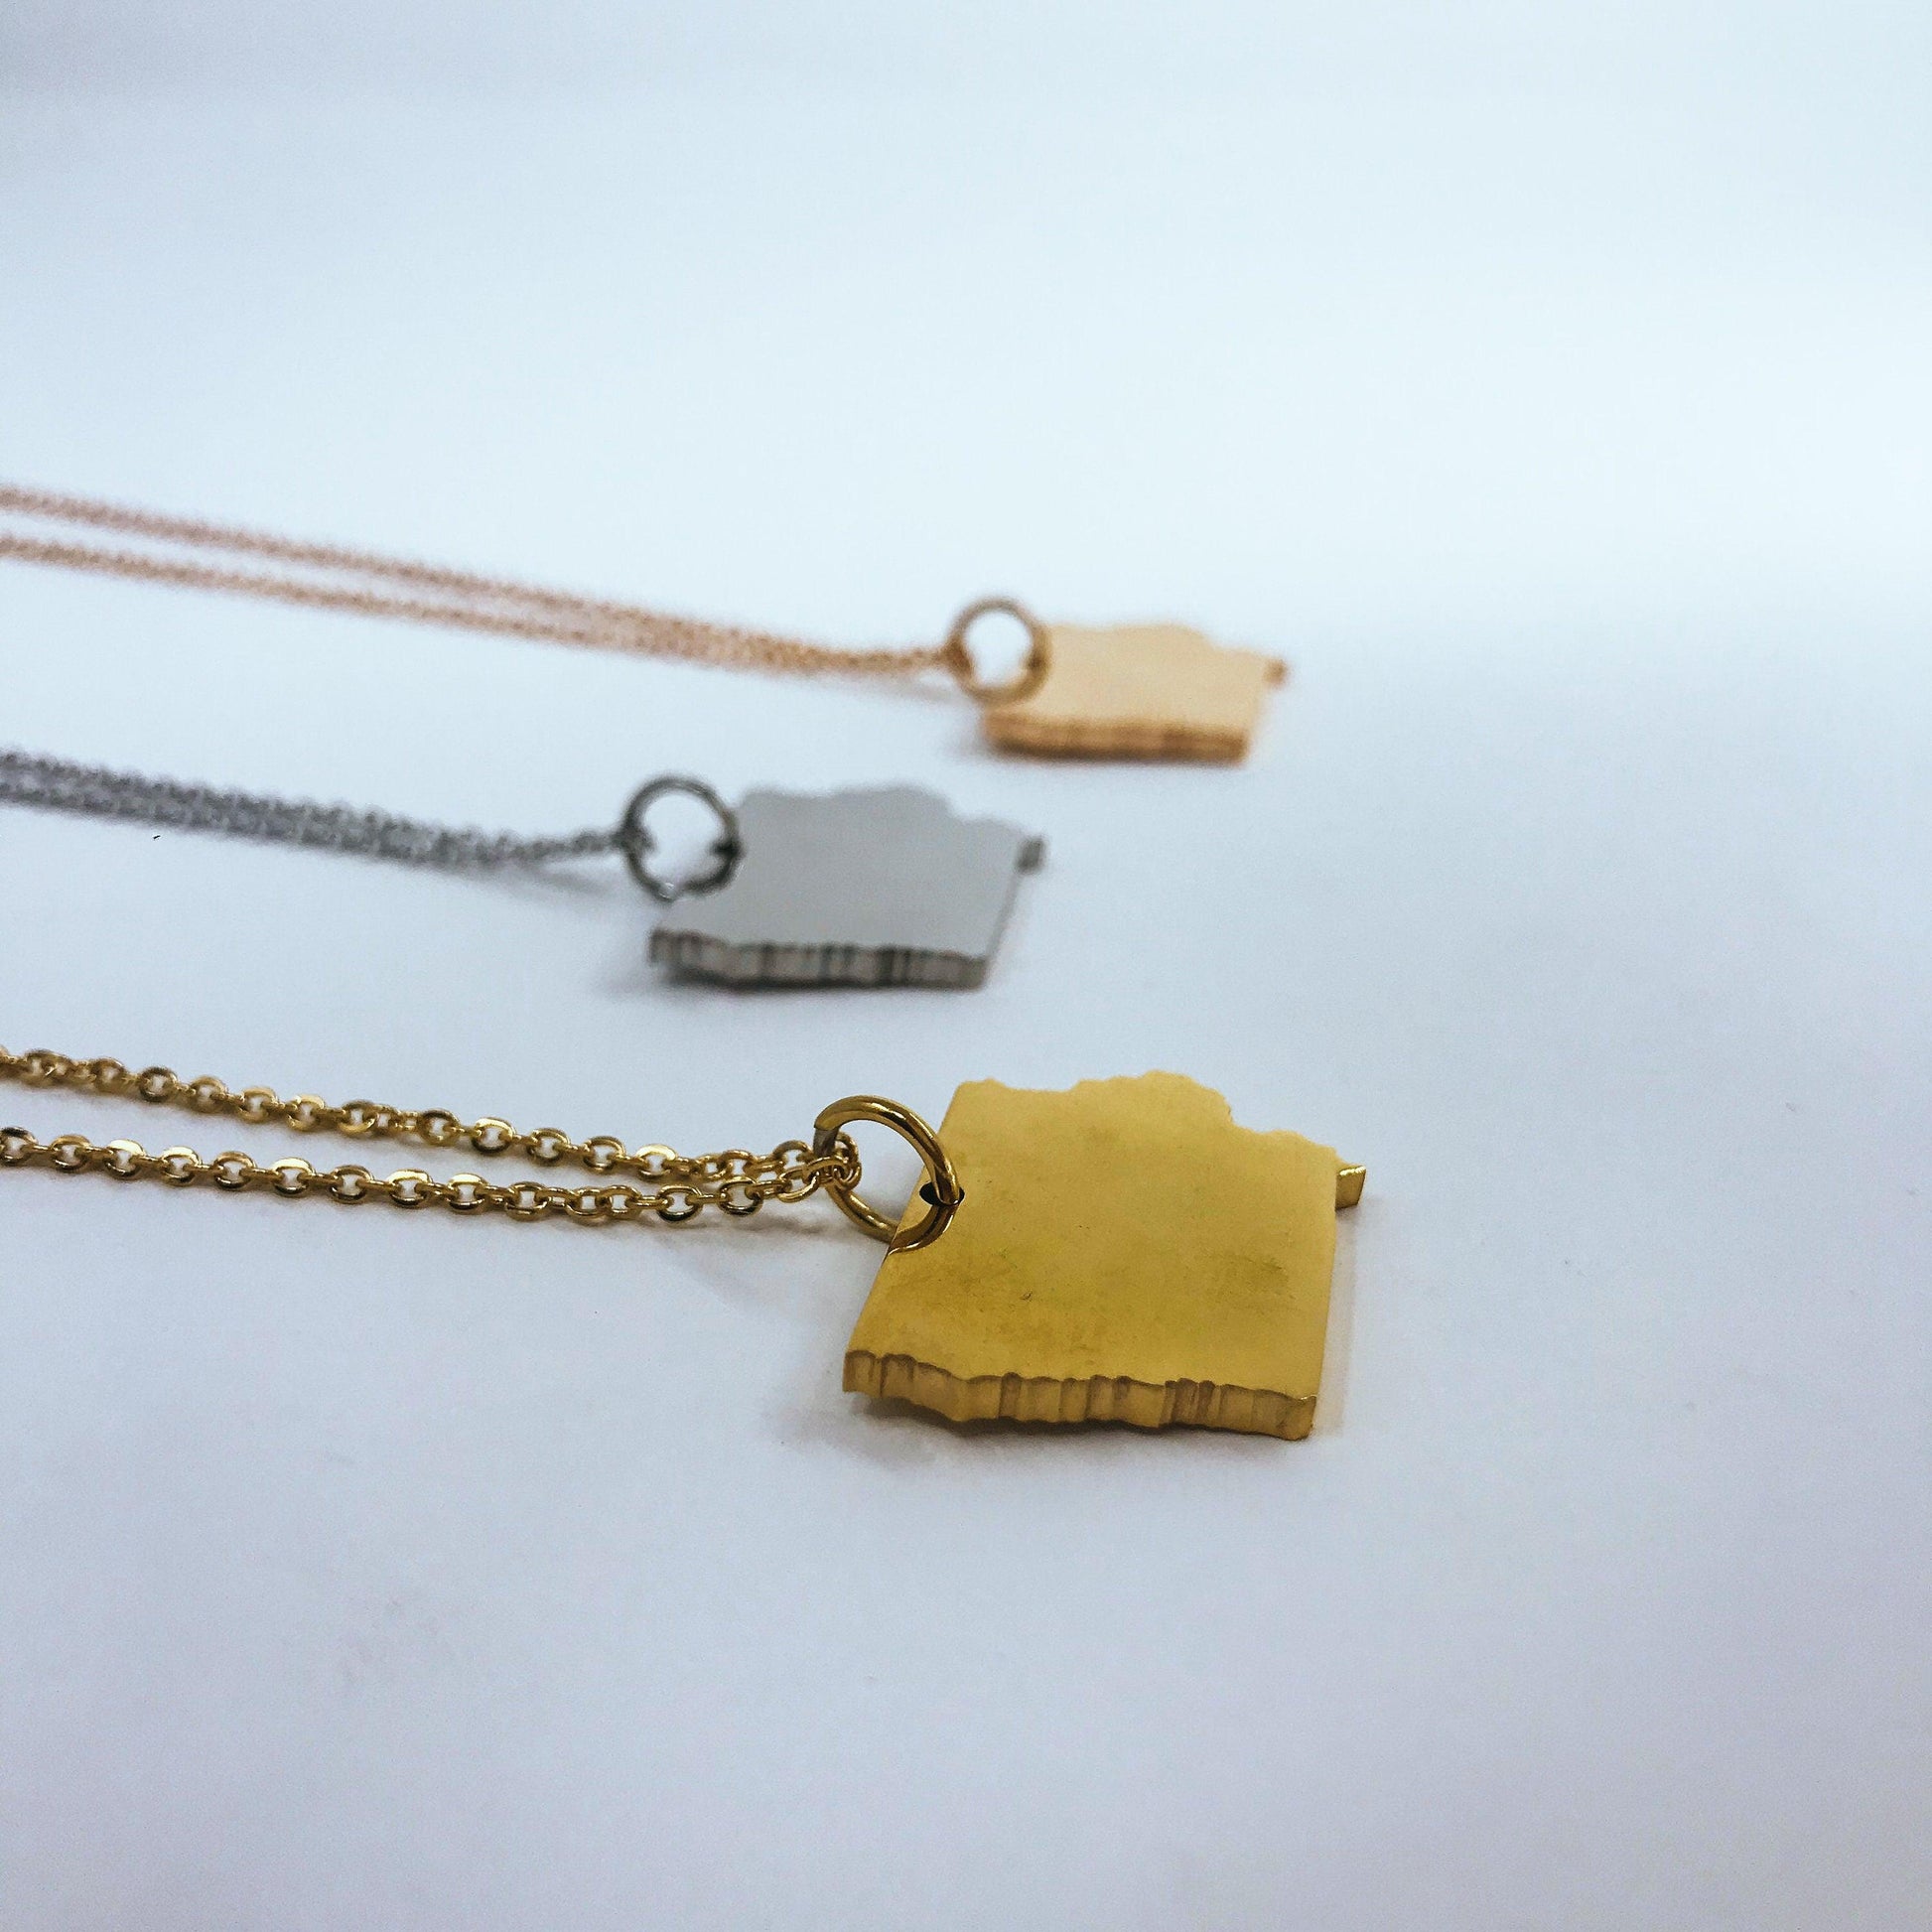 Iowa State Silhouette Necklaces in 3 different colors: Gold, Silver & Rose Gold